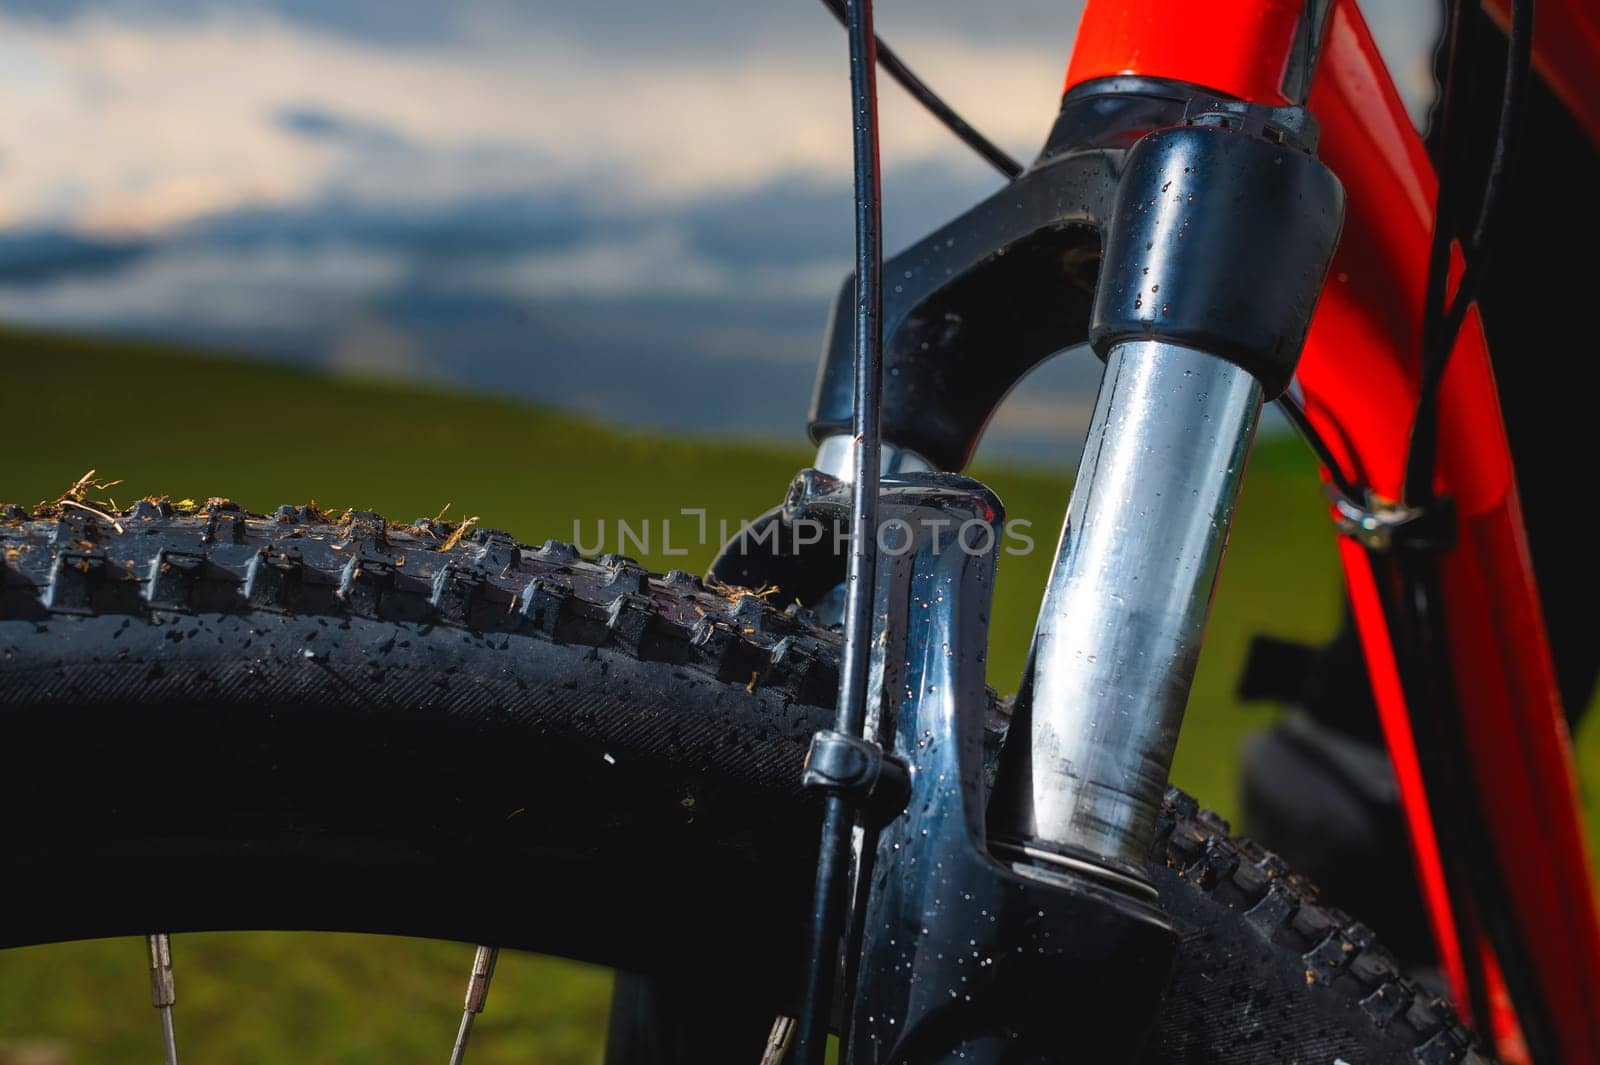 high-speed bicycle disc brake system, perforated disc and caliper, mtb, close-up, mountain bike brake efficiency.